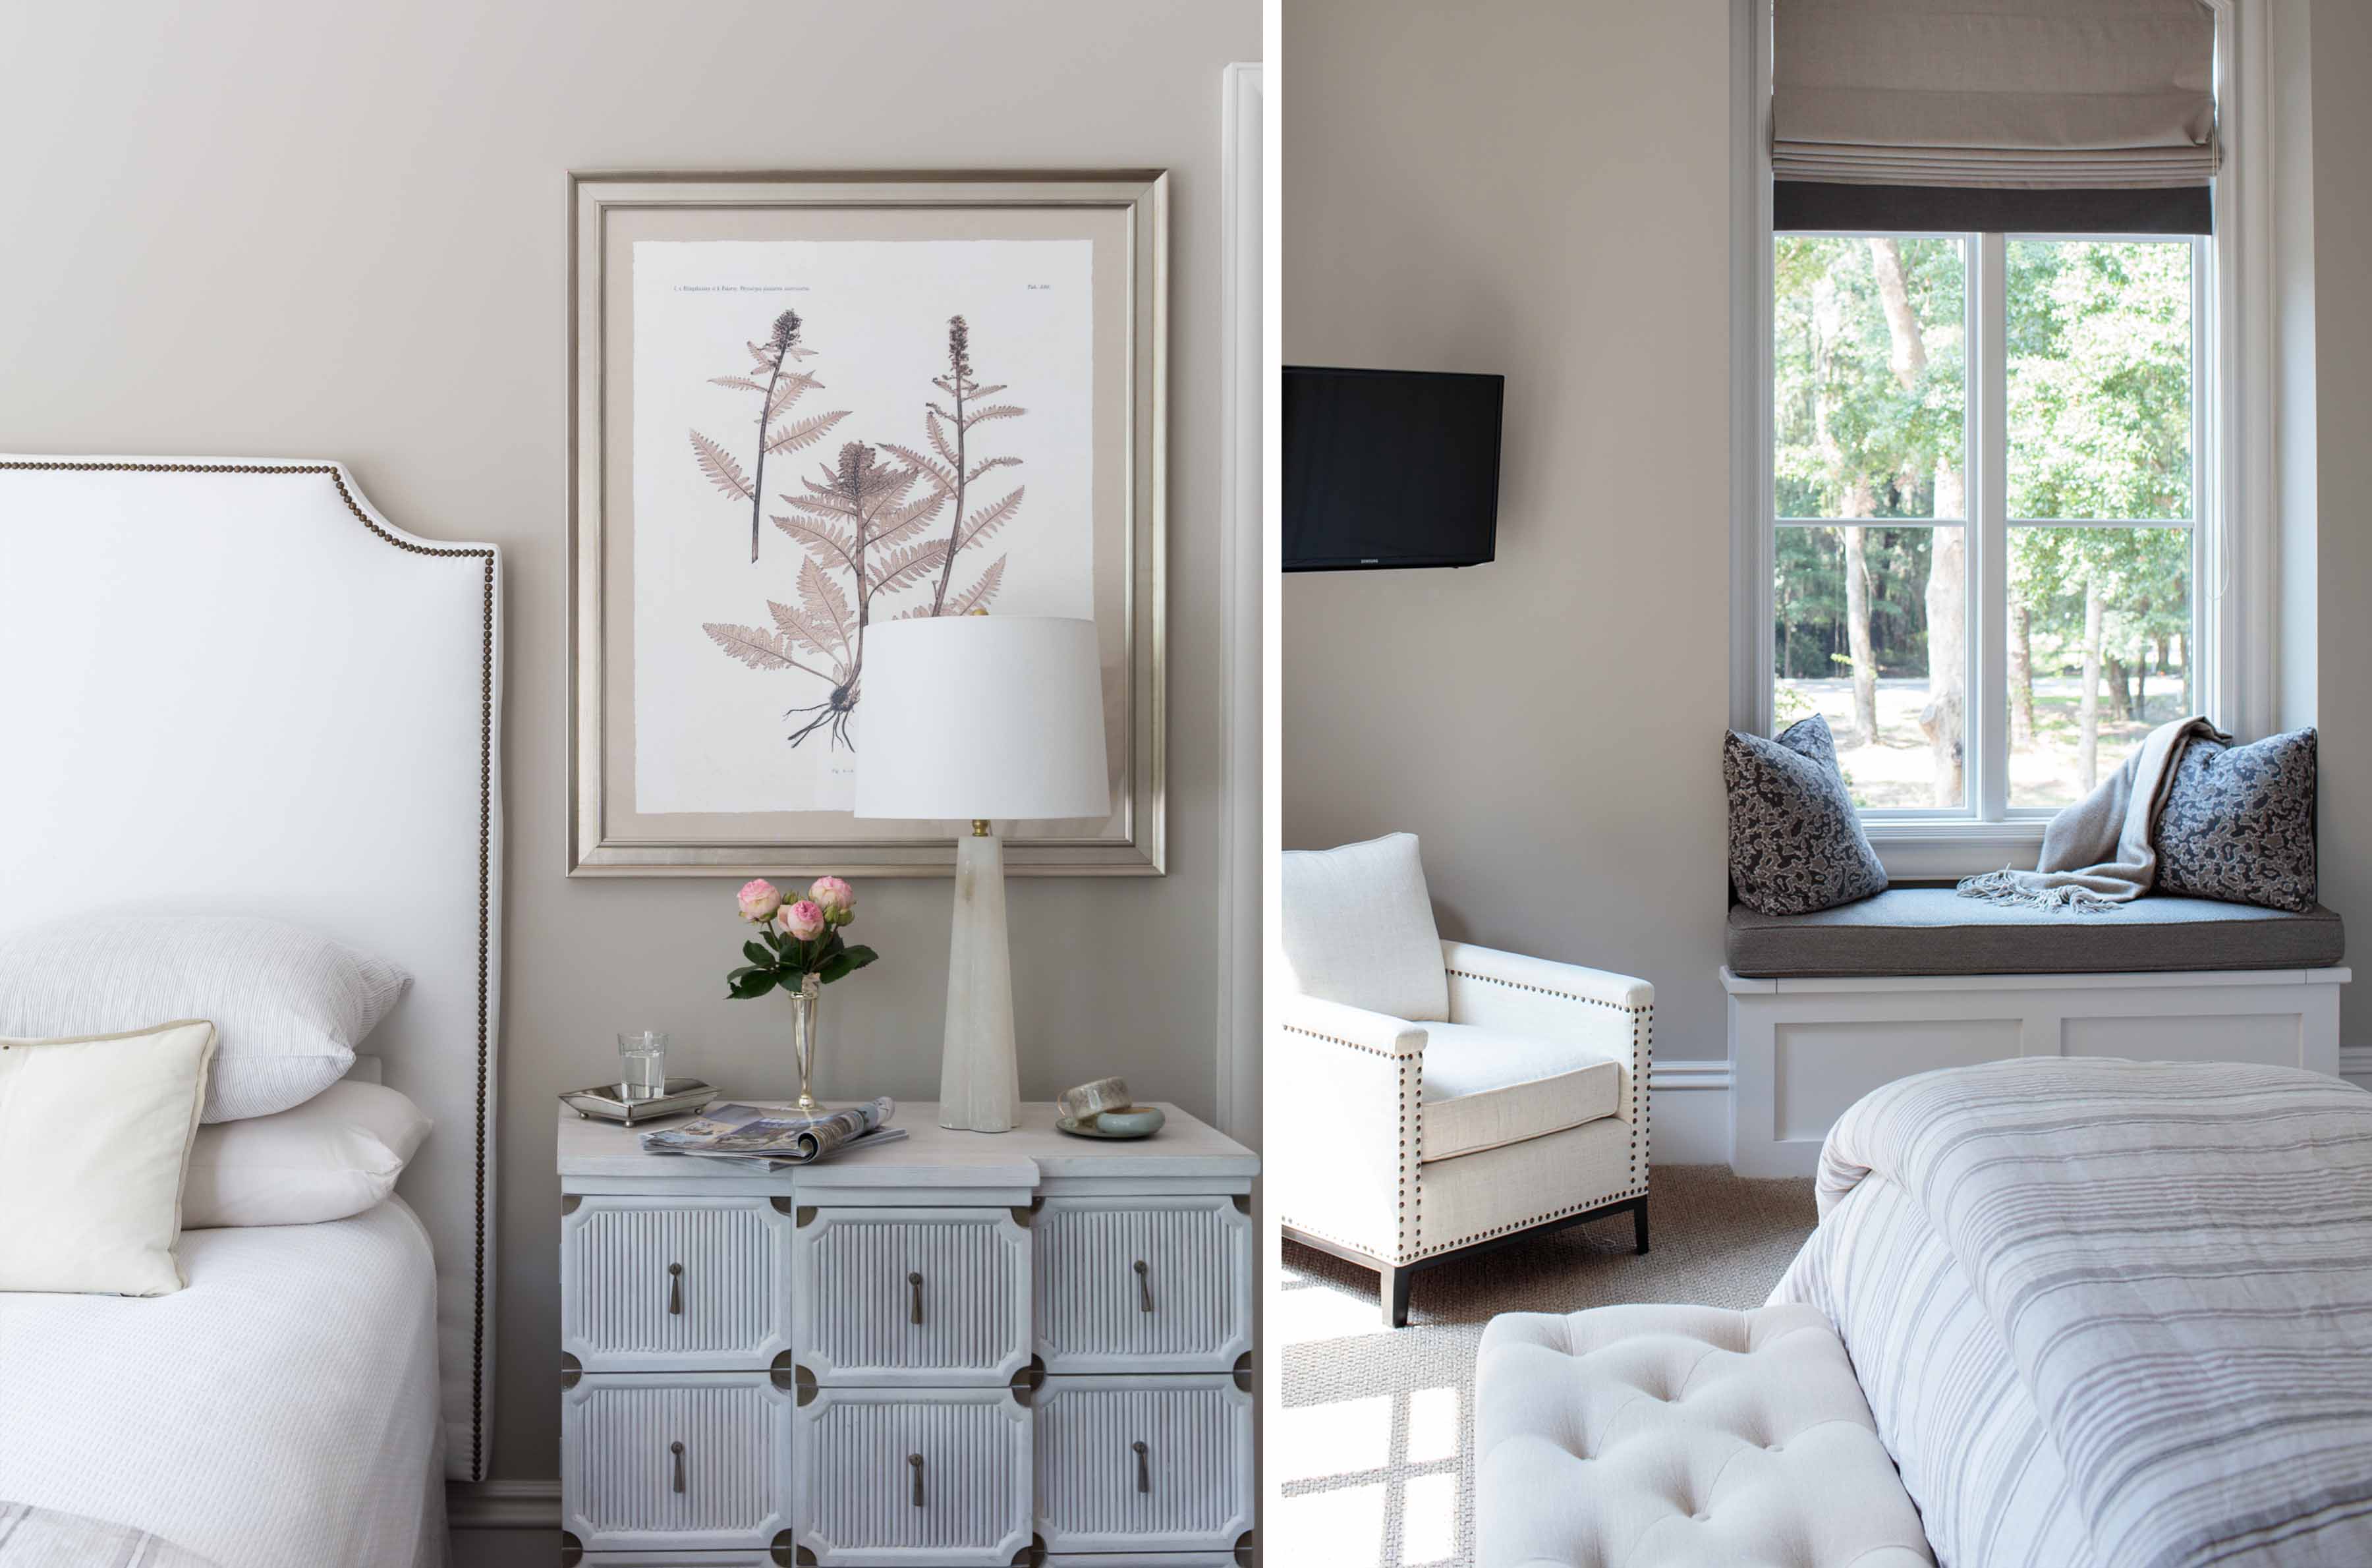 guest bedroom decoration by Sharon Cleland of the J Banks Design Group creates a soothing retreat with notes of sophistication